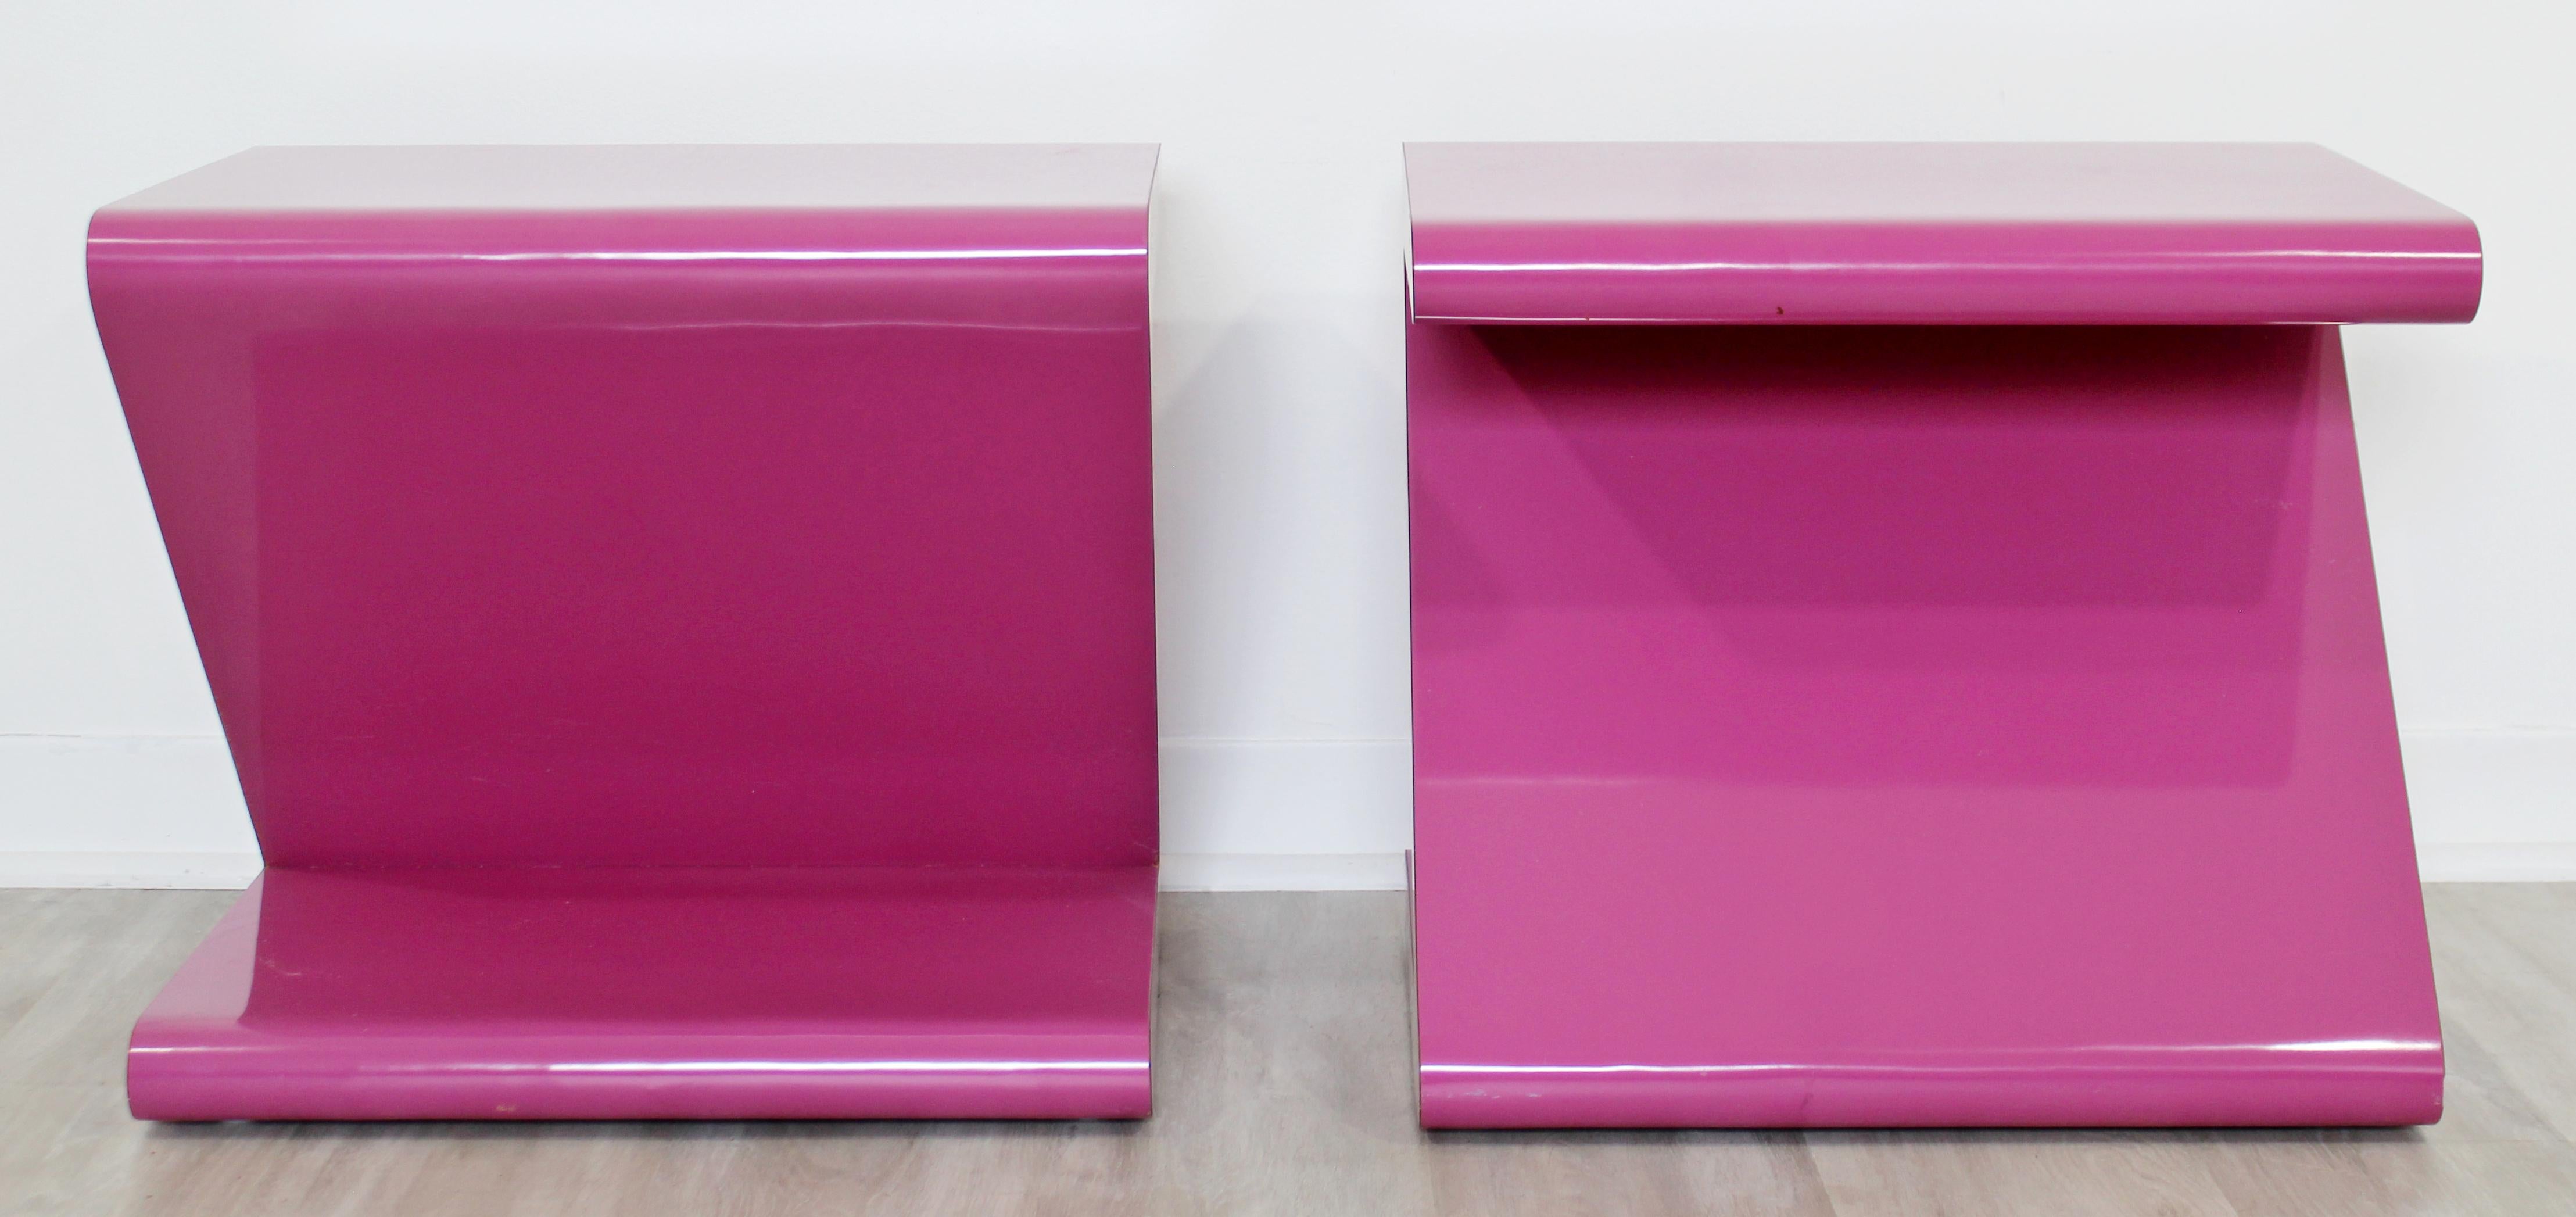 Late 20th Century Contemporary Modern Pair of Acrylic Z-Shaped Side End Tables 1980s Pink